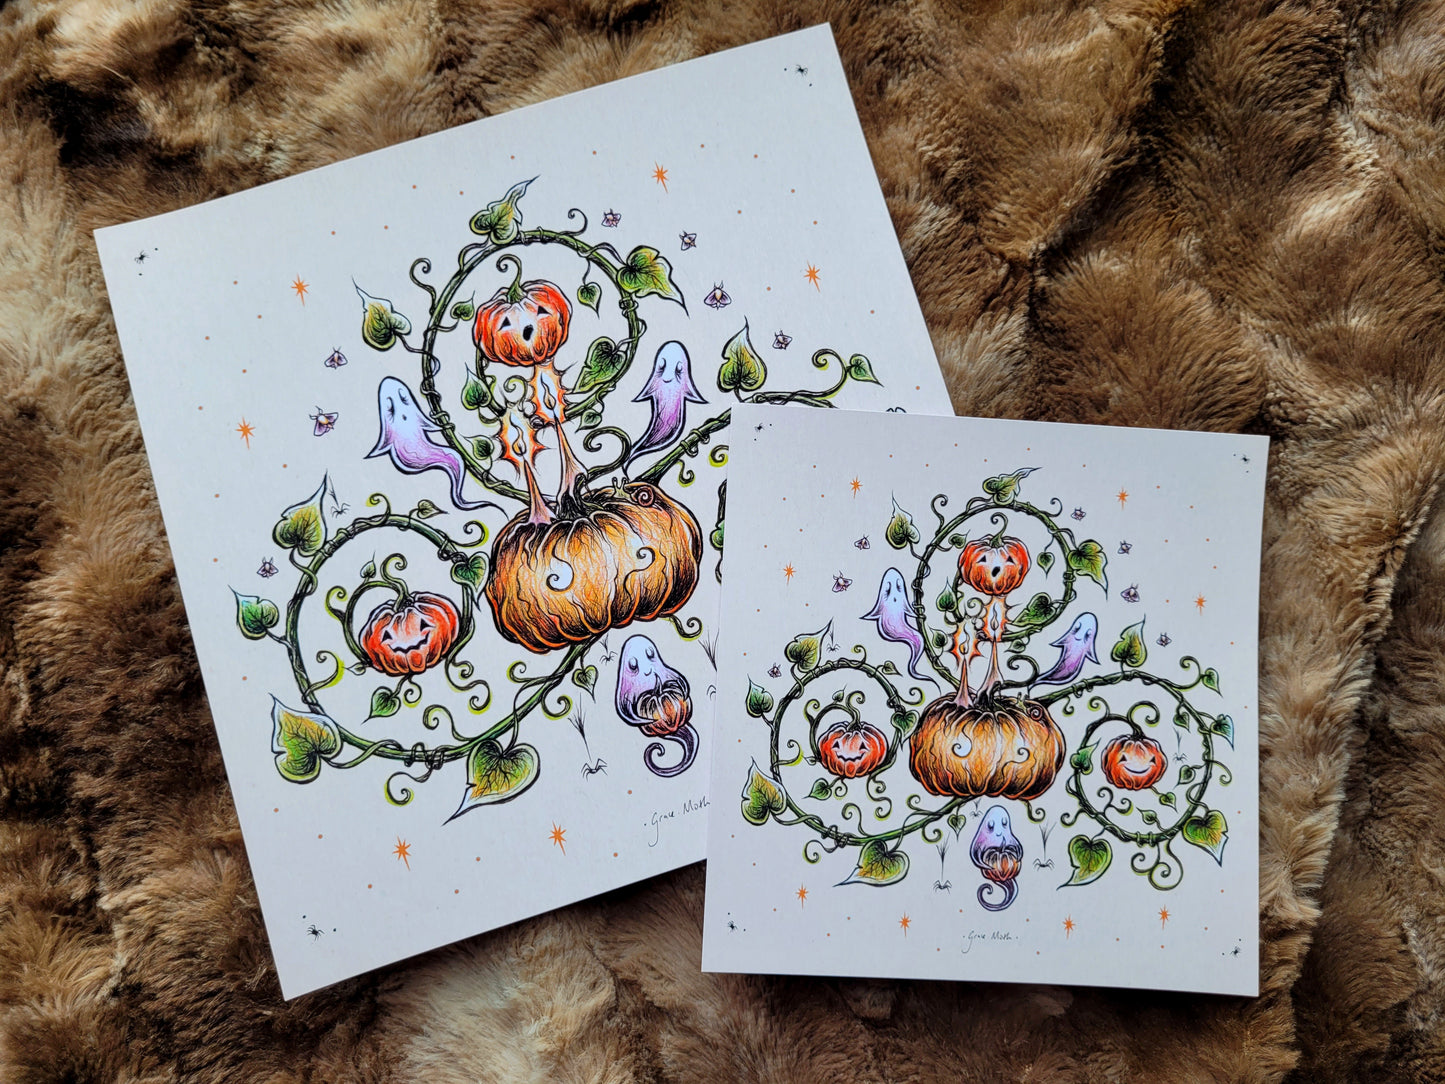 Pumpkin Patch with stars - Square art print by Grace Moth